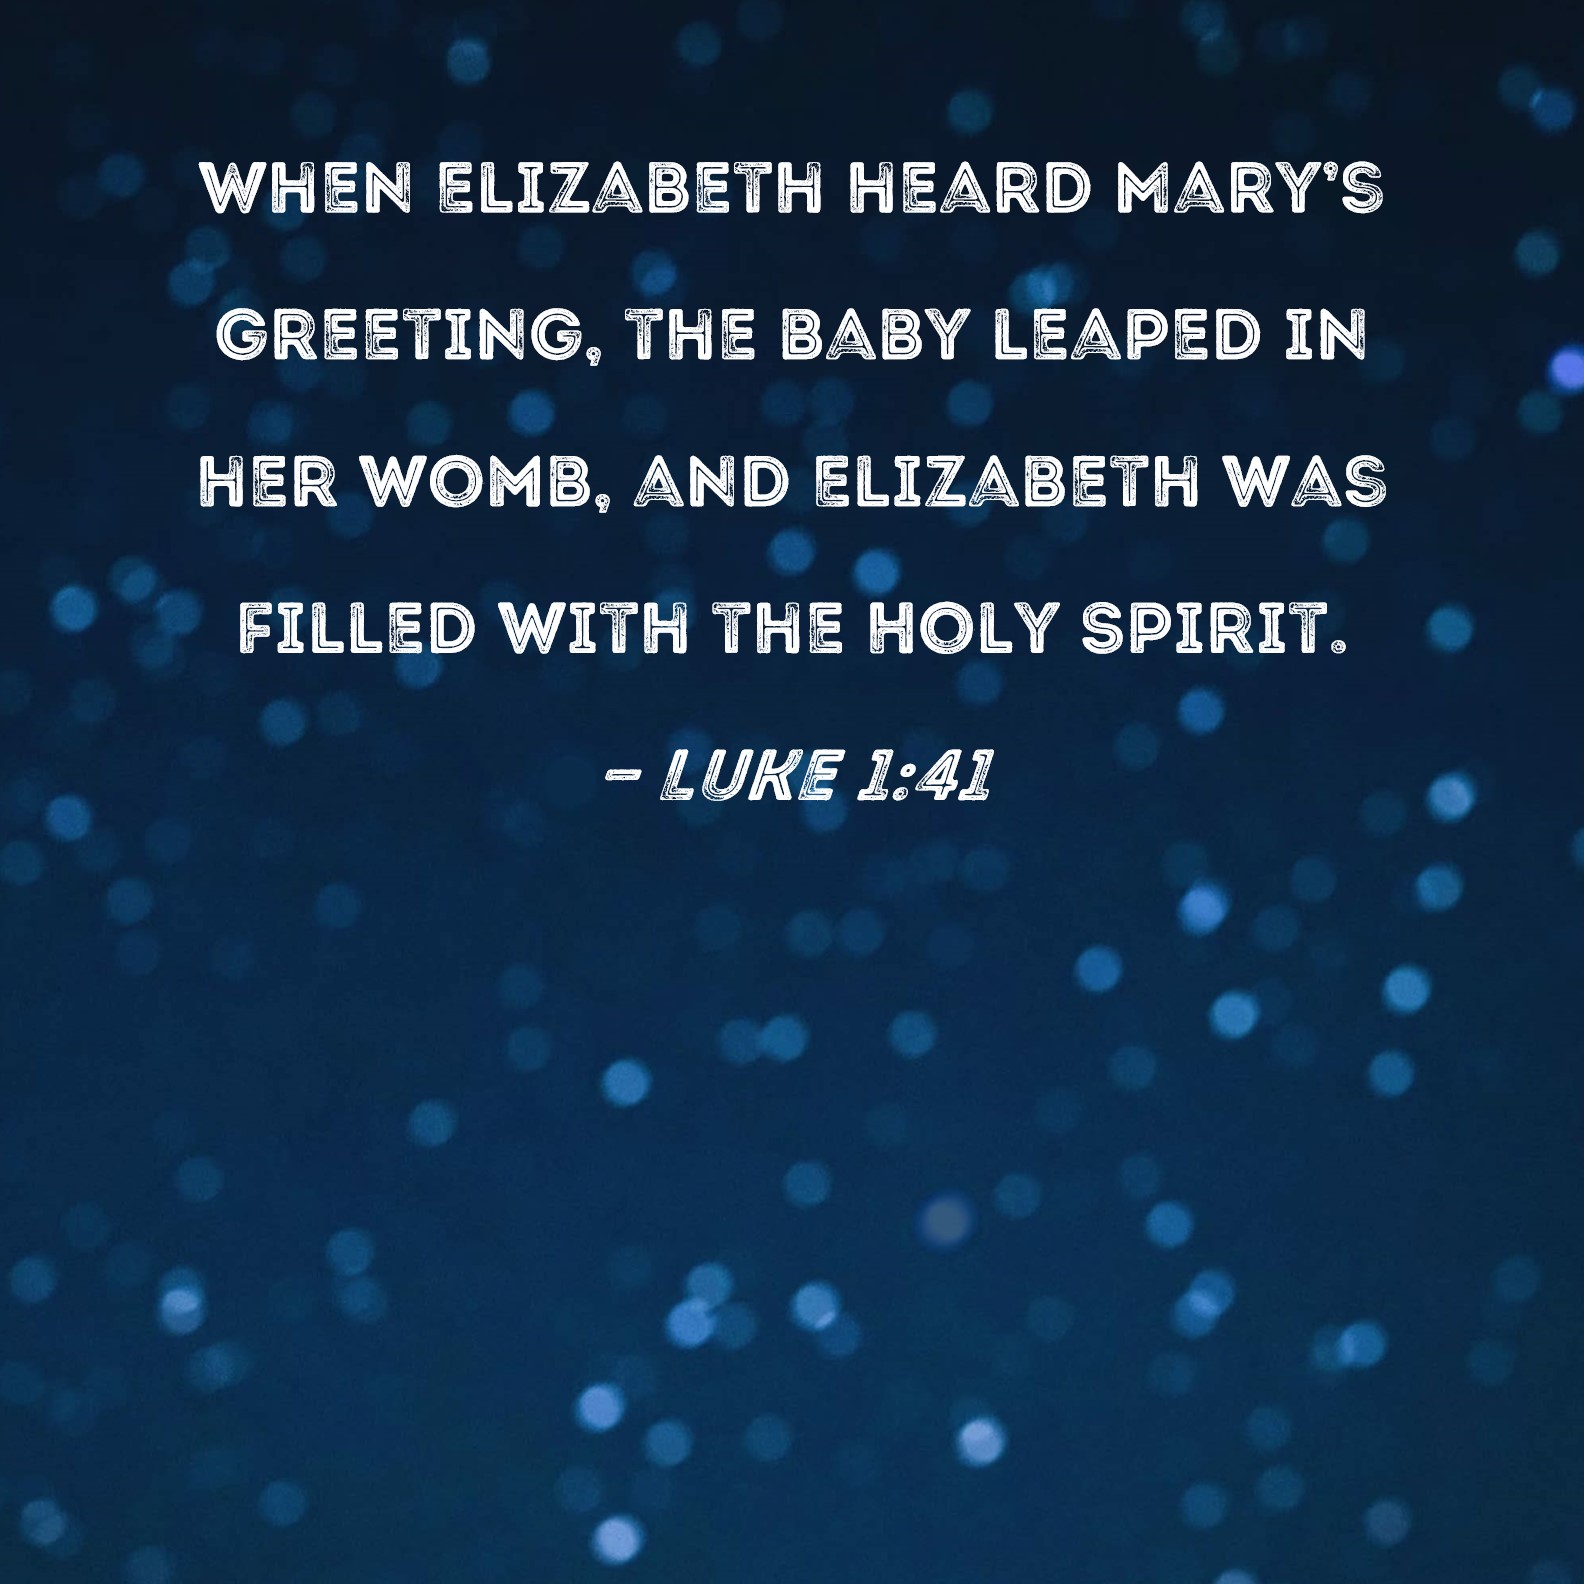 Luke 1:41 When Elizabeth heard Mary's greeting, the baby leaped in her womb,  and Elizabeth was filled with the Holy Spirit.